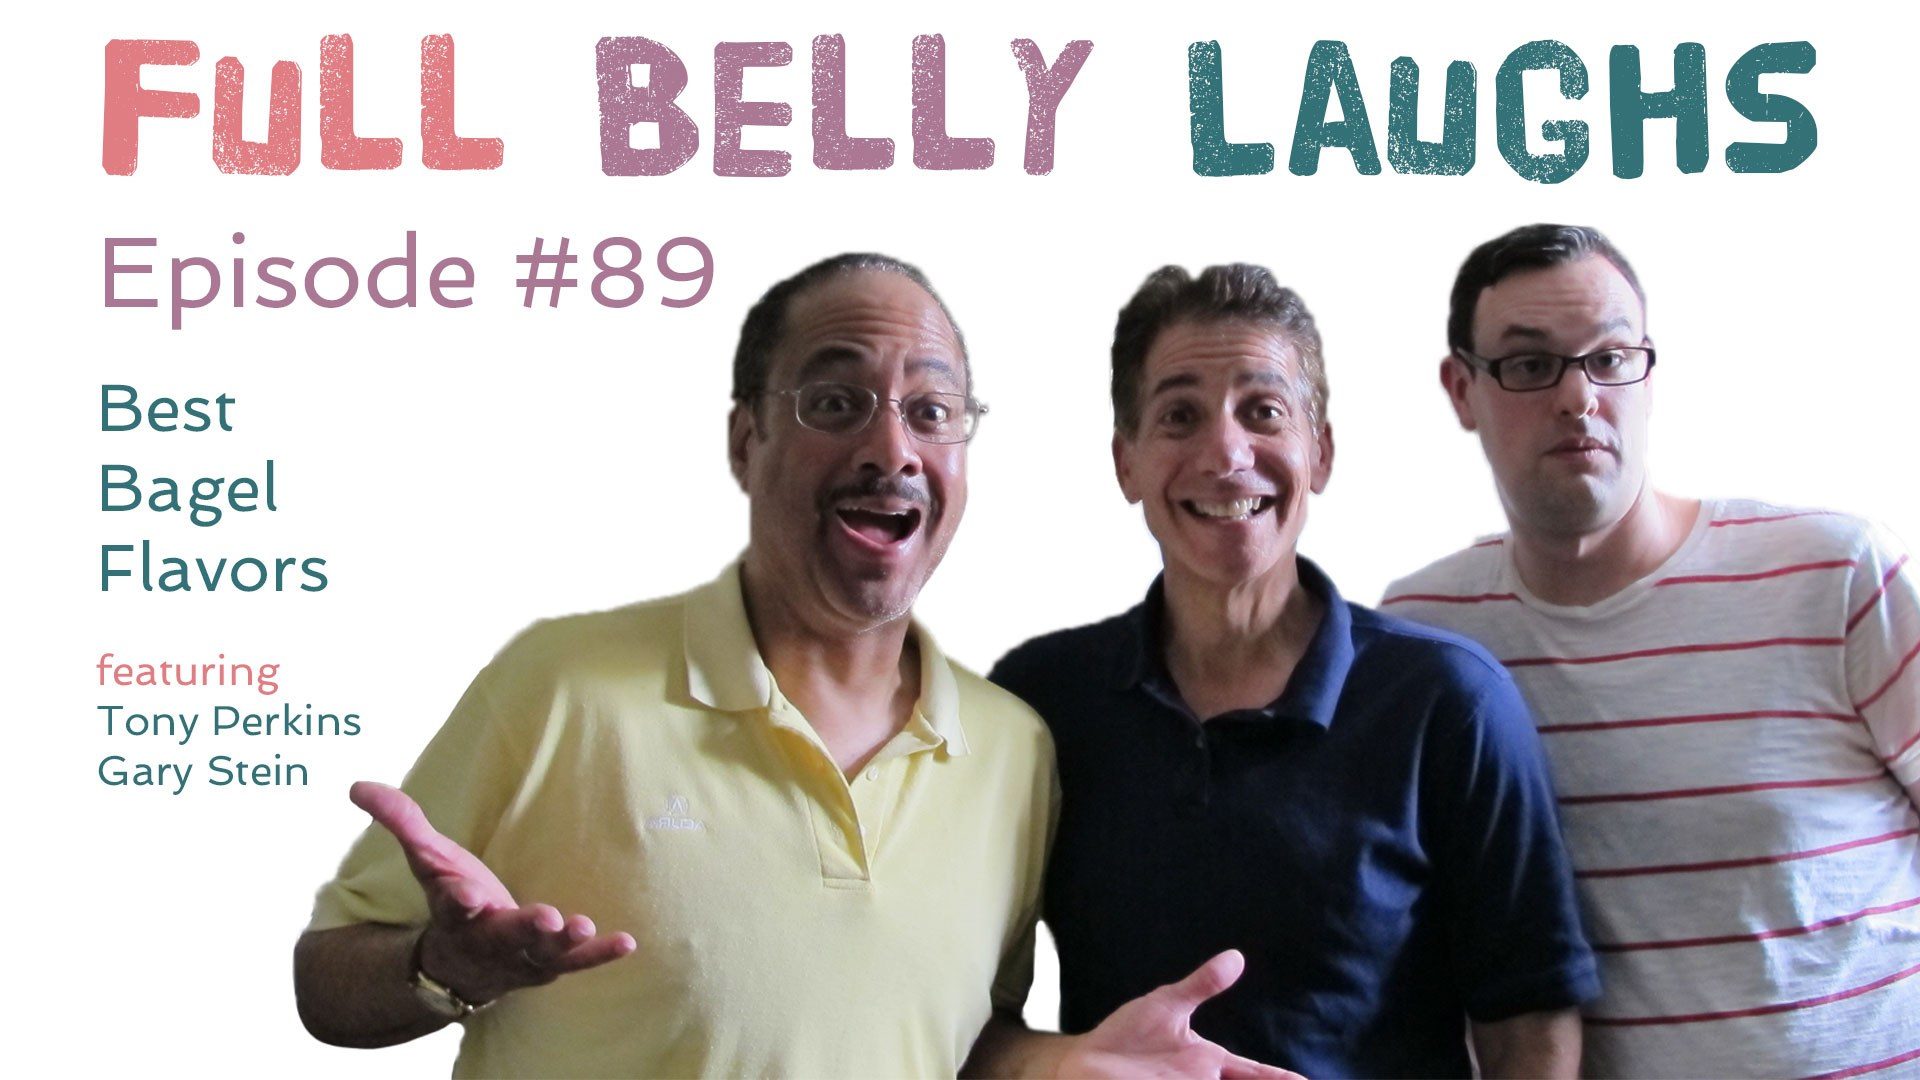 full belly laughs podcast episode 89 best bagel flavors tony perkins gary stein audio artwork